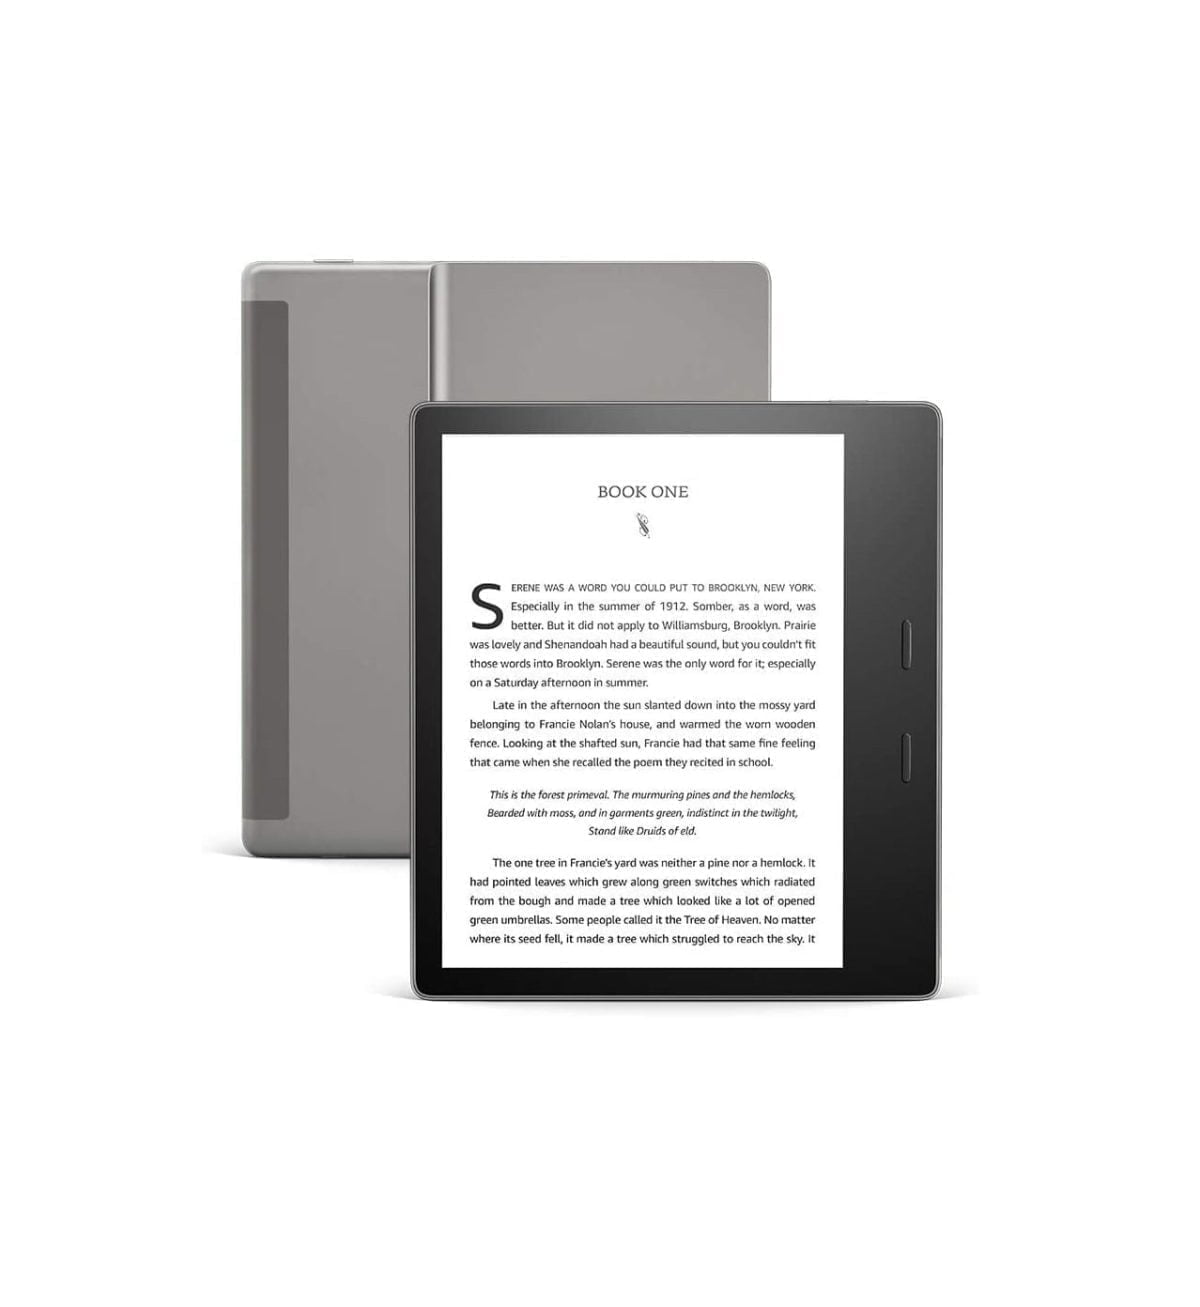 61Hhewtb Rl. Ac Sl1000 Amazon &Amp;Lt;H1&Amp;Gt;All-New Kindle Oasis (10Th Gen), Now With Adjustable Warm Light, 7&Amp;Quot; Display, Waterproof, 32 Gb, Wi-Fi, Graphite&Amp;Lt;/H1&Amp;Gt; &Amp;Lt;Ul Class=&Amp;Quot;A-Unordered-List A-Vertical A-Spacing-Mini&Amp;Quot;&Amp;Gt; &Amp;Lt;Li&Amp;Gt;&Amp;Lt;Span Class=&Amp;Quot;A-List-Item&Amp;Quot;&Amp;Gt;Our Largest, Highest Resolution Display— 7” And 300 Ppi, Glare-Free.&Amp;Lt;/Span&Amp;Gt;&Amp;Lt;/Li&Amp;Gt; &Amp;Lt;Li&Amp;Gt;&Amp;Lt;Span Class=&Amp;Quot;A-List-Item&Amp;Quot;&Amp;Gt;Adjustable Warm Light To Shift Screen Shade From White To Amber.&Amp;Lt;/Span&Amp;Gt;&Amp;Lt;/Li&Amp;Gt; &Amp;Lt;Li&Amp;Gt;&Amp;Lt;Span Class=&Amp;Quot;A-List-Item&Amp;Quot;&Amp;Gt;Waterproof (Ipx8) So You Can Read In The Bath Or By The Pool.&Amp;Lt;/Span&Amp;Gt;&Amp;Lt;/Li&Amp;Gt; &Amp;Lt;Li&Amp;Gt;&Amp;Lt;Span Class=&Amp;Quot;A-List-Item&Amp;Quot;&Amp;Gt;Thin And Light Ergonomic Design With Dedicated Page Turn Buttons.&Amp;Lt;/Span&Amp;Gt;&Amp;Lt;/Li&Amp;Gt; &Amp;Lt;Li&Amp;Gt;&Amp;Lt;Span Class=&Amp;Quot;A-List-Item&Amp;Quot;&Amp;Gt;Reads Like Real Paper With The Latest E-Ink Technology For Fast Page Turns.&Amp;Lt;/Span&Amp;Gt;&Amp;Lt;/Li&Amp;Gt; &Amp;Lt;Li&Amp;Gt;&Amp;Lt;Span Class=&Amp;Quot;A-List-Item&Amp;Quot;&Amp;Gt;Keep Reading - A Single Charge Lasts Weeks, Not Hours.&Amp;Lt;/Span&Amp;Gt;&Amp;Lt;/Li&Amp;Gt; &Amp;Lt;Li&Amp;Gt;&Amp;Lt;Span Class=&Amp;Quot;A-List-Item&Amp;Quot;&Amp;Gt;Browse Over 1 Million Ebooks In The Kindle Store On Amazon Us, Including Thousands Of Arabic Titles.&Amp;Lt;/Span&Amp;Gt;&Amp;Lt;/Li&Amp;Gt; &Amp;Lt;/Ul&Amp;Gt; All-New Kindle Oasis All-New Kindle Oasis (10Th Gen), Now With Adjustable Warm Light, 7&Amp;Quot; Display, Waterproof, 32 Gb, Wi-Fi, Graphite